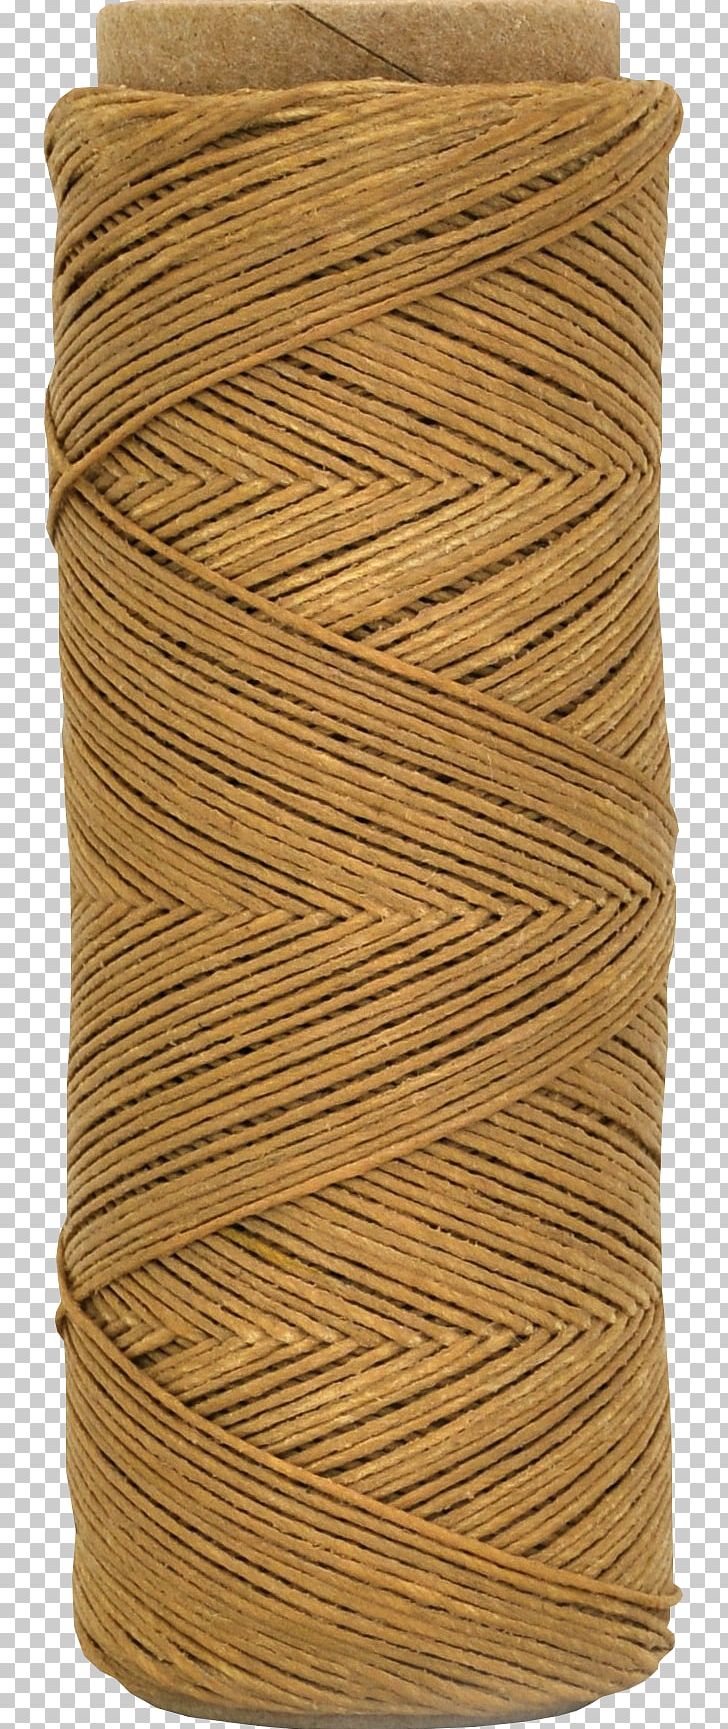 Wire Rope Wire Rope PNG, Clipart, Jute, Knitting, Rope, Steel, Steel Wire Free PNG Download